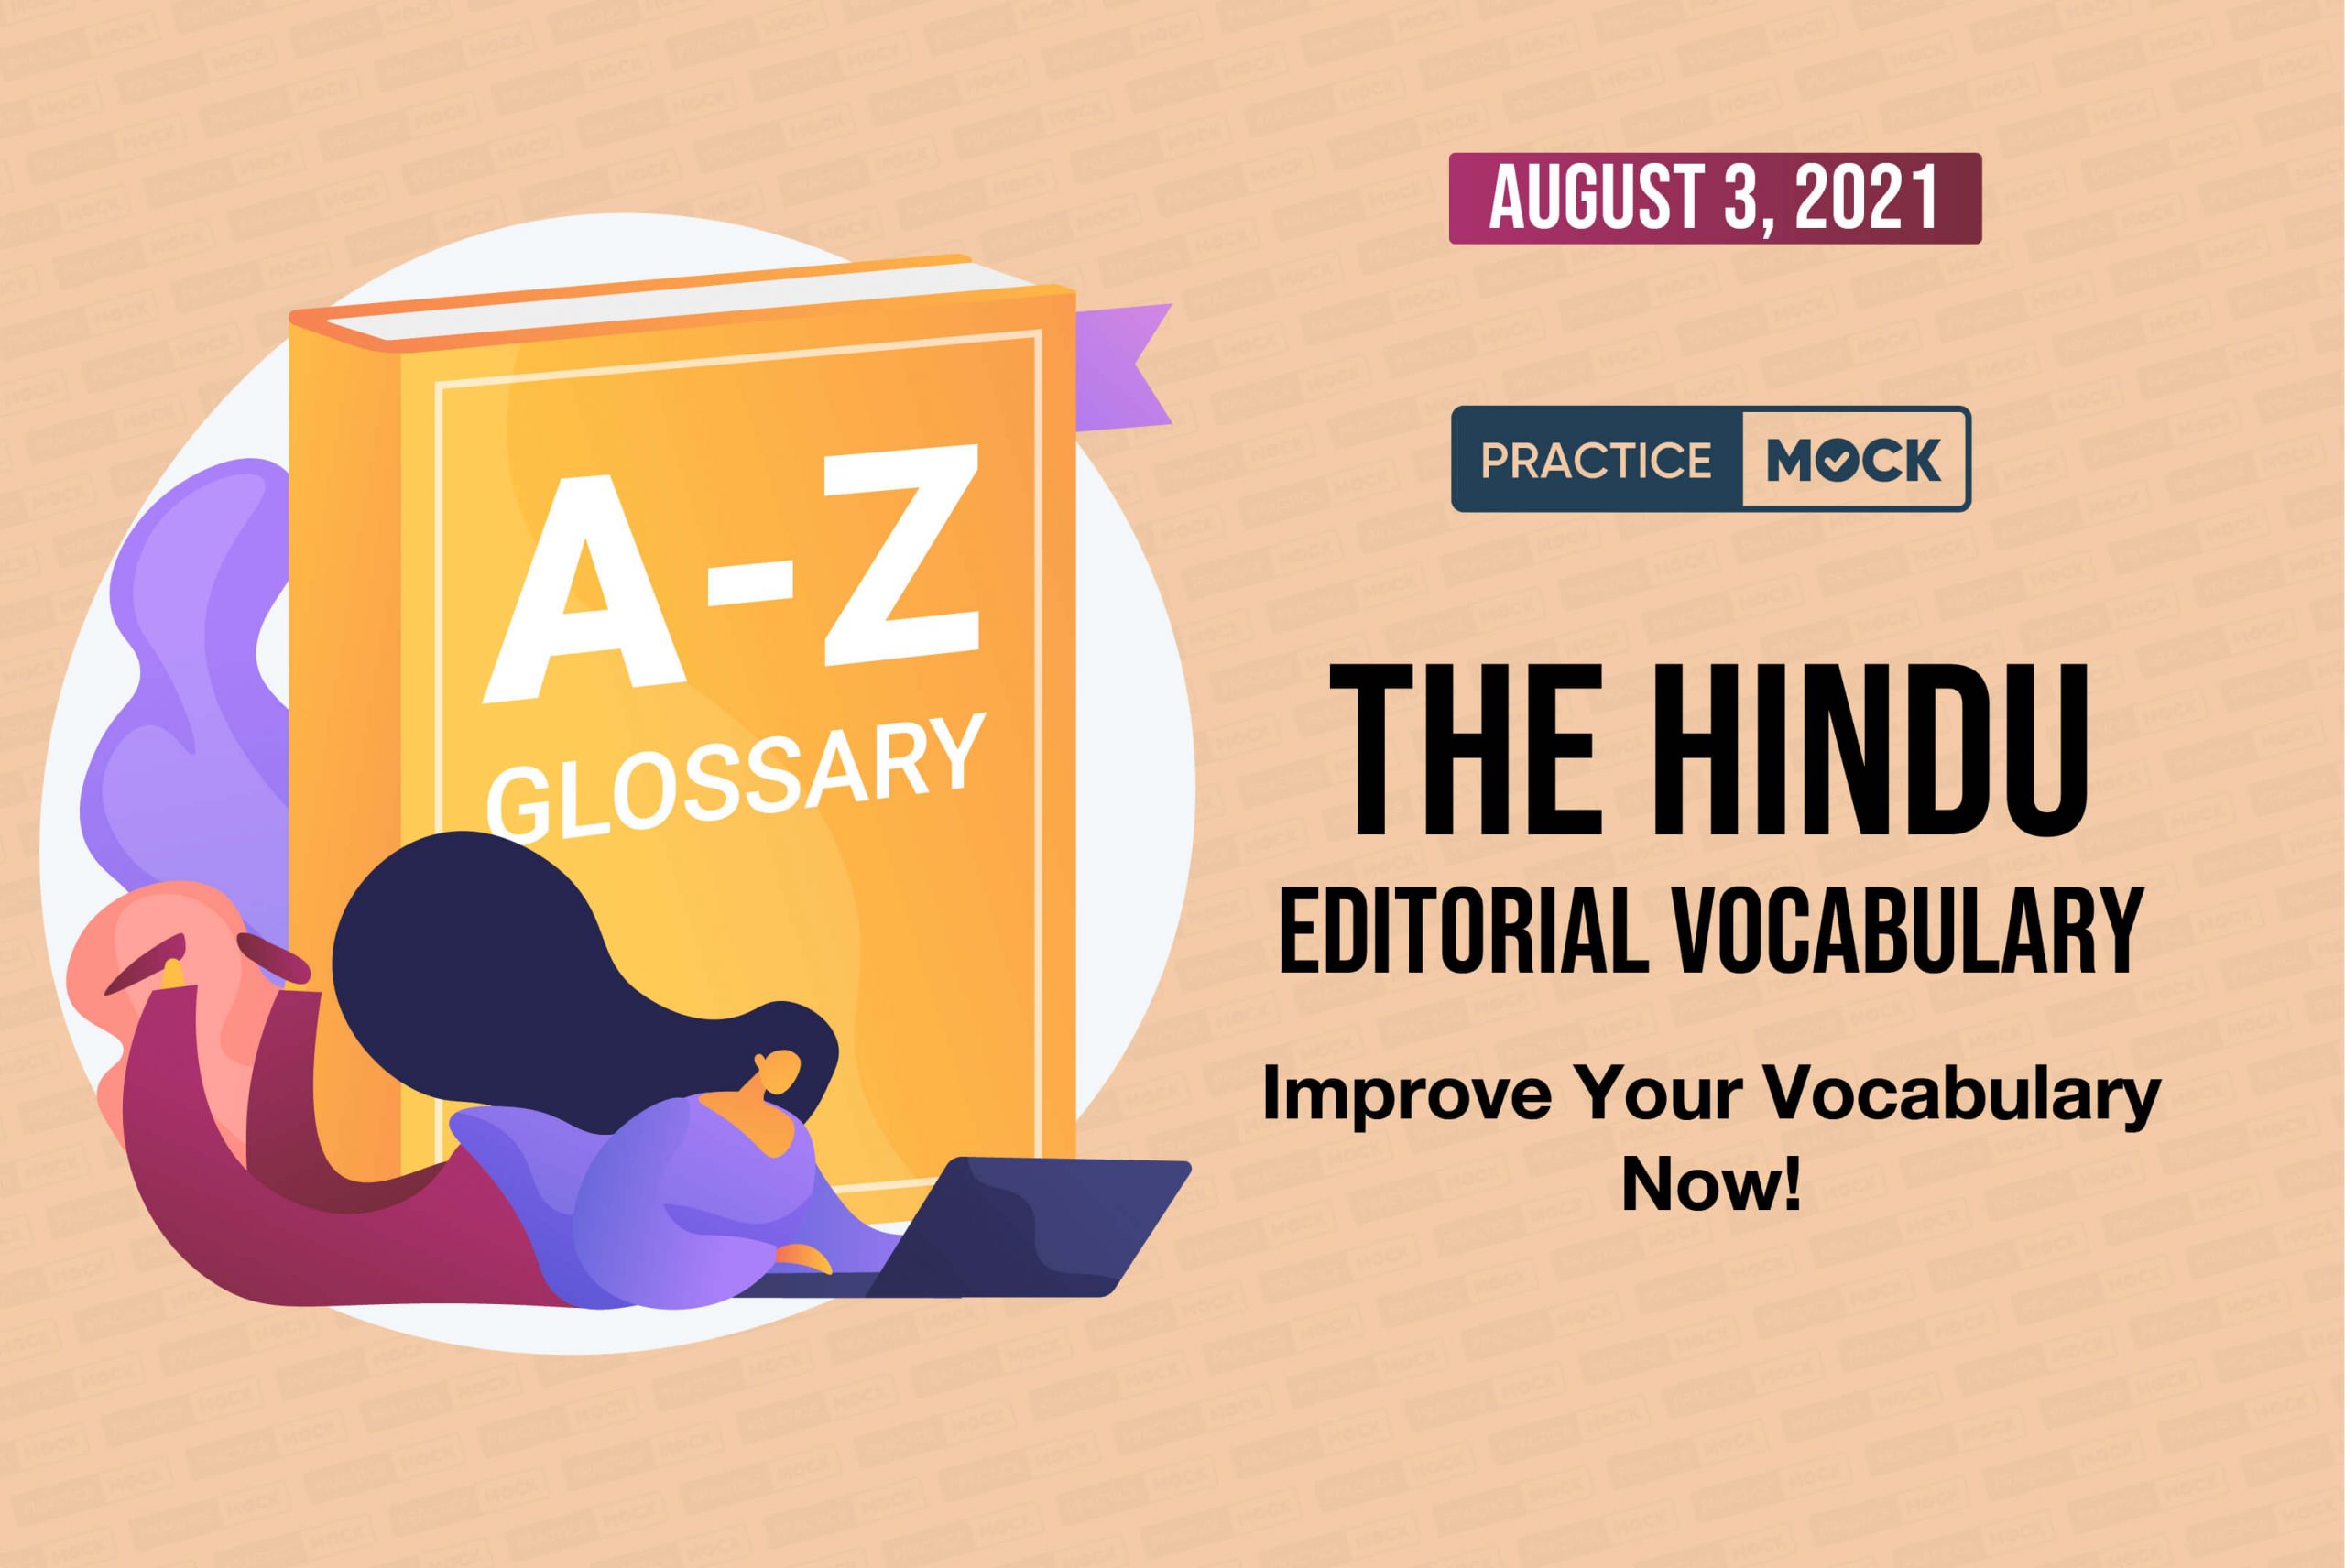 The Hindu Editorial Vocabulary– Aug 3, 2021; Day 112